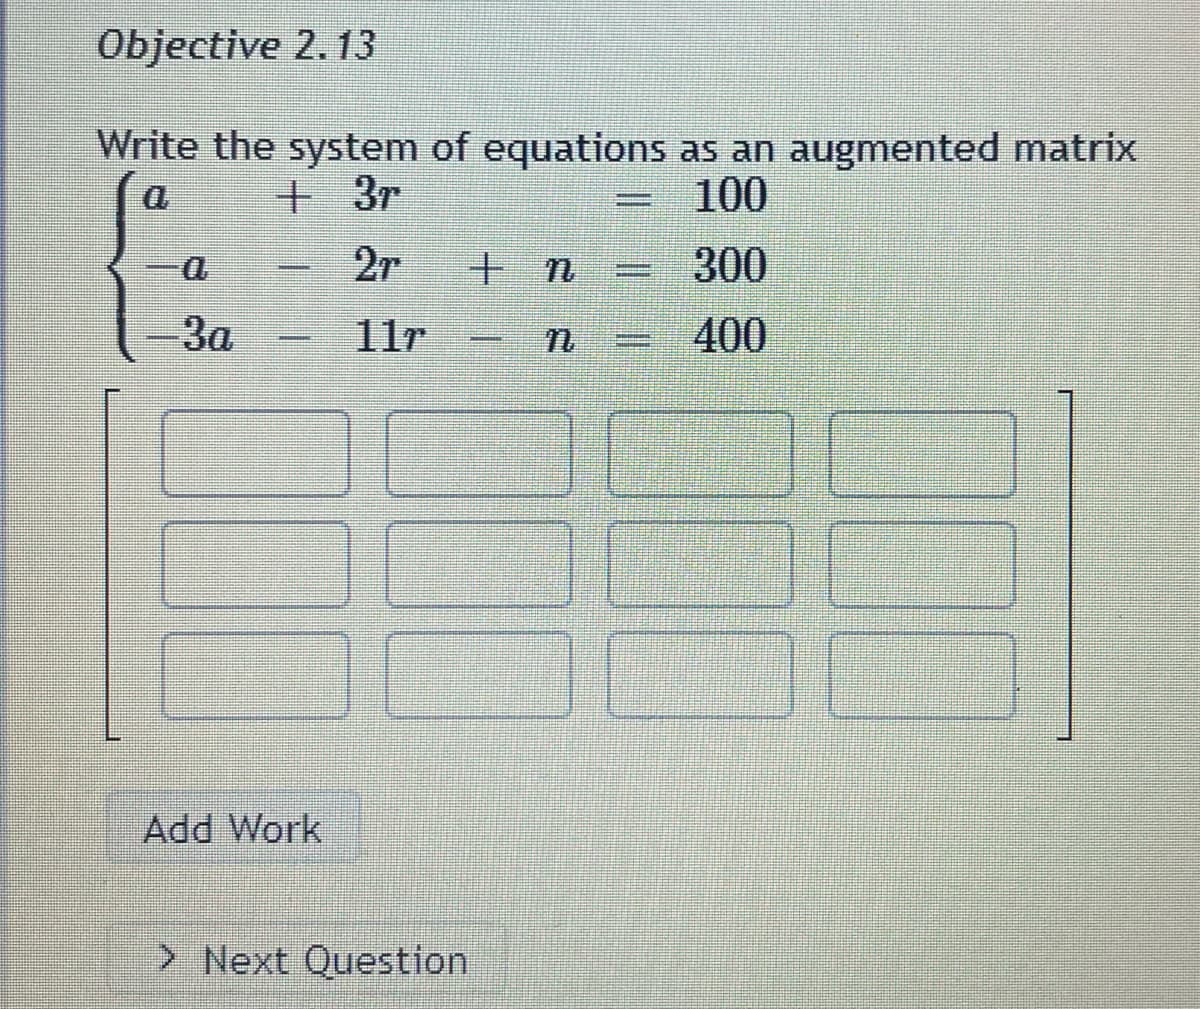 Objective 2.13
Write the system of equations as an augmented matrix
+3r
100
2r
300
400
3a
-
CREDINE
Add Work
> Next Question
+ n
=
S